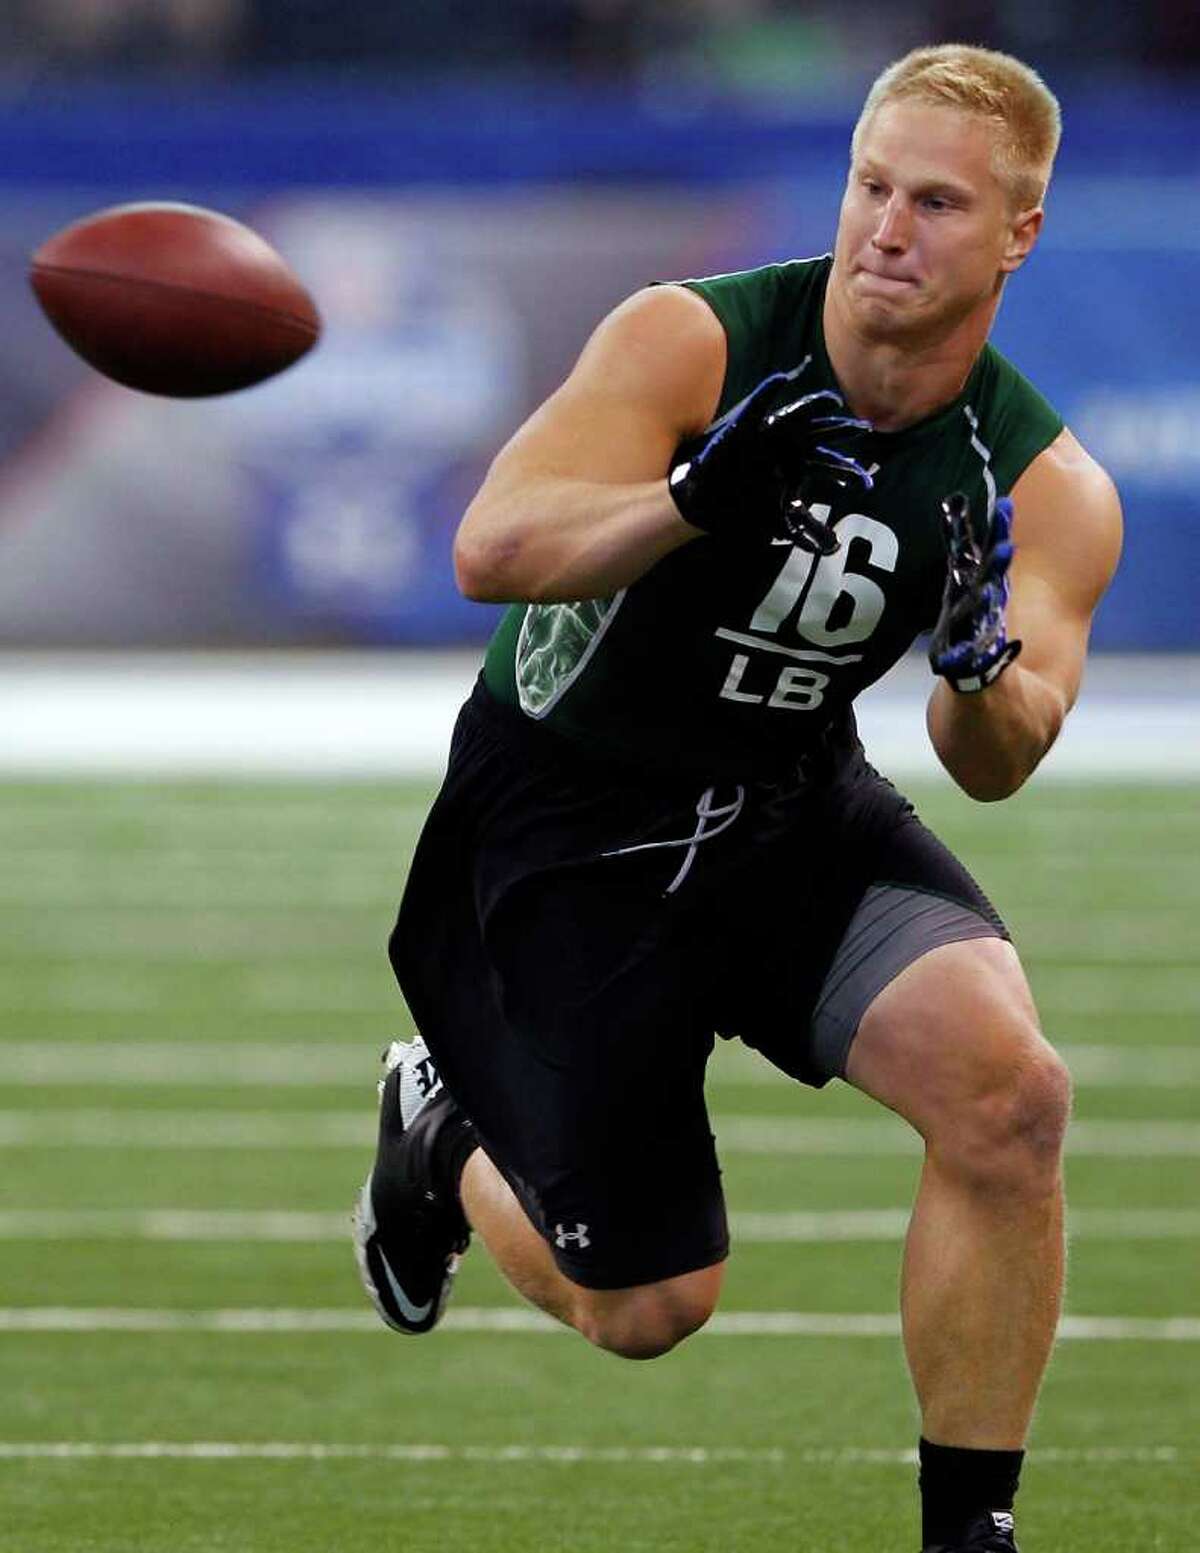 Connecticut linebacker Scott Lutrus catches a pass during the 2011 NFL Scouting Combine at Lucas Oil Stadium on Feb. 28 in Indianapolis, Ind. (AP Photo/Ben Liebenberg)